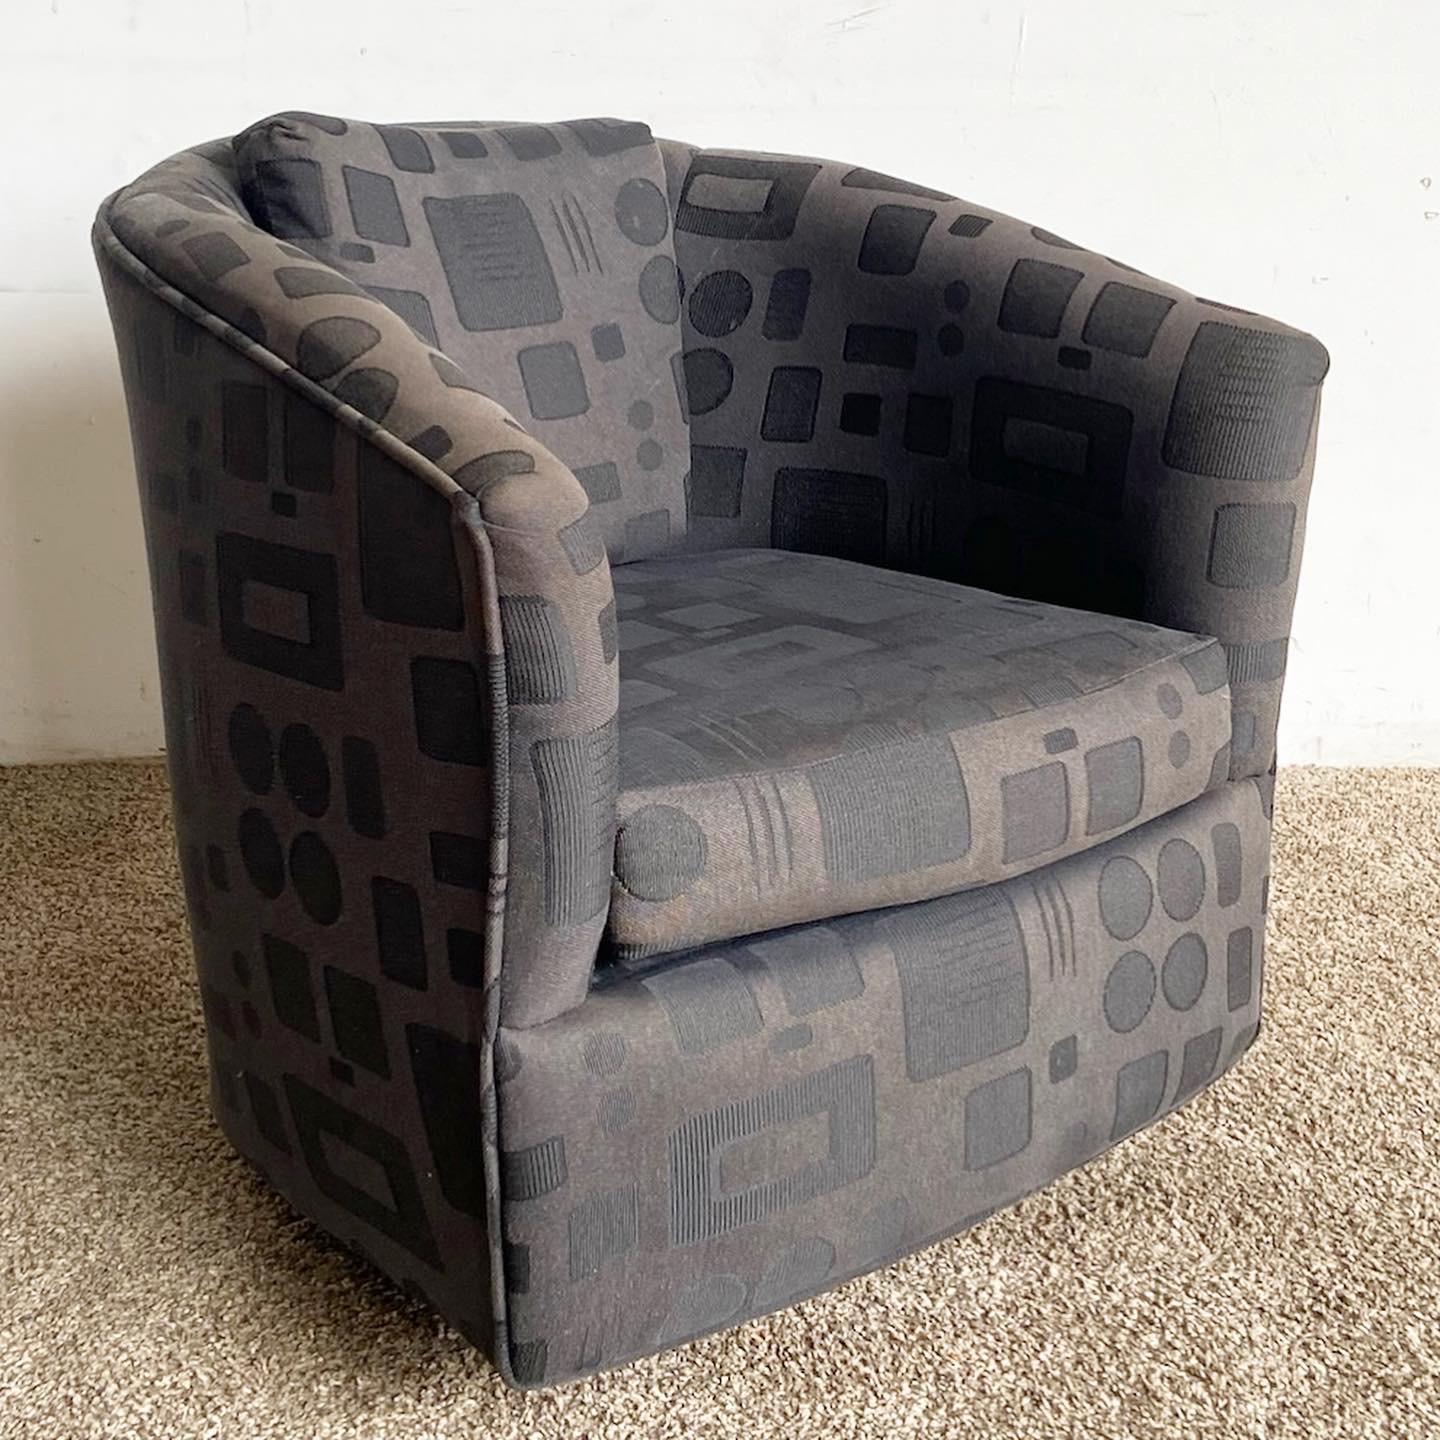 Immerse in the bold, luxurious allure of our Postmodern Black Swivel Barrel Chair. A perfect blend of comfort, style, and postmodern design.

Luxurious black fabric combined with an unconventional postmodern design.
Sculpted barrel silhouette with a